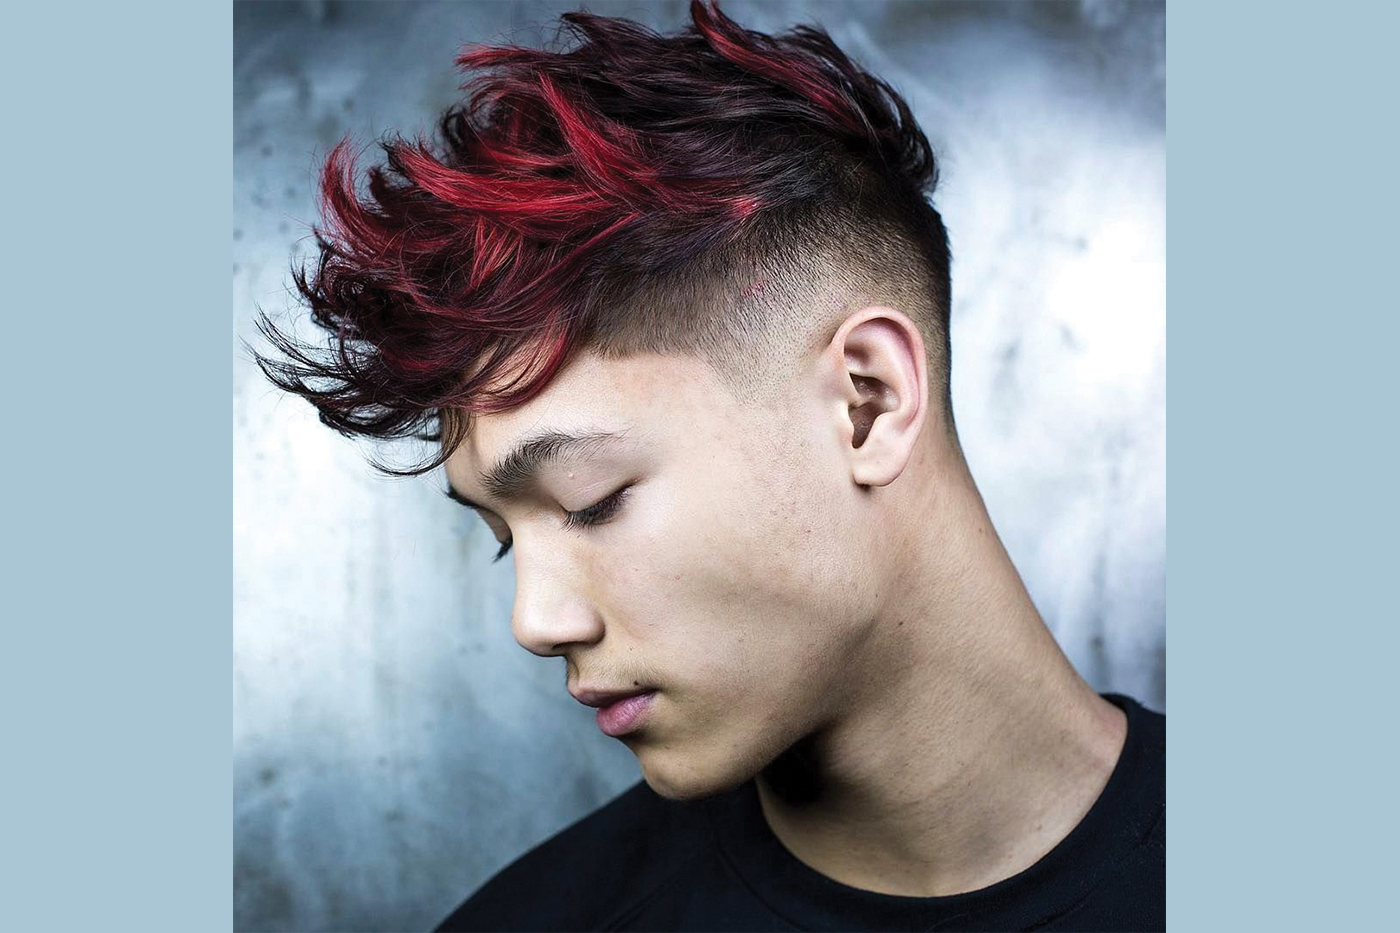 Hair Color Options For Men